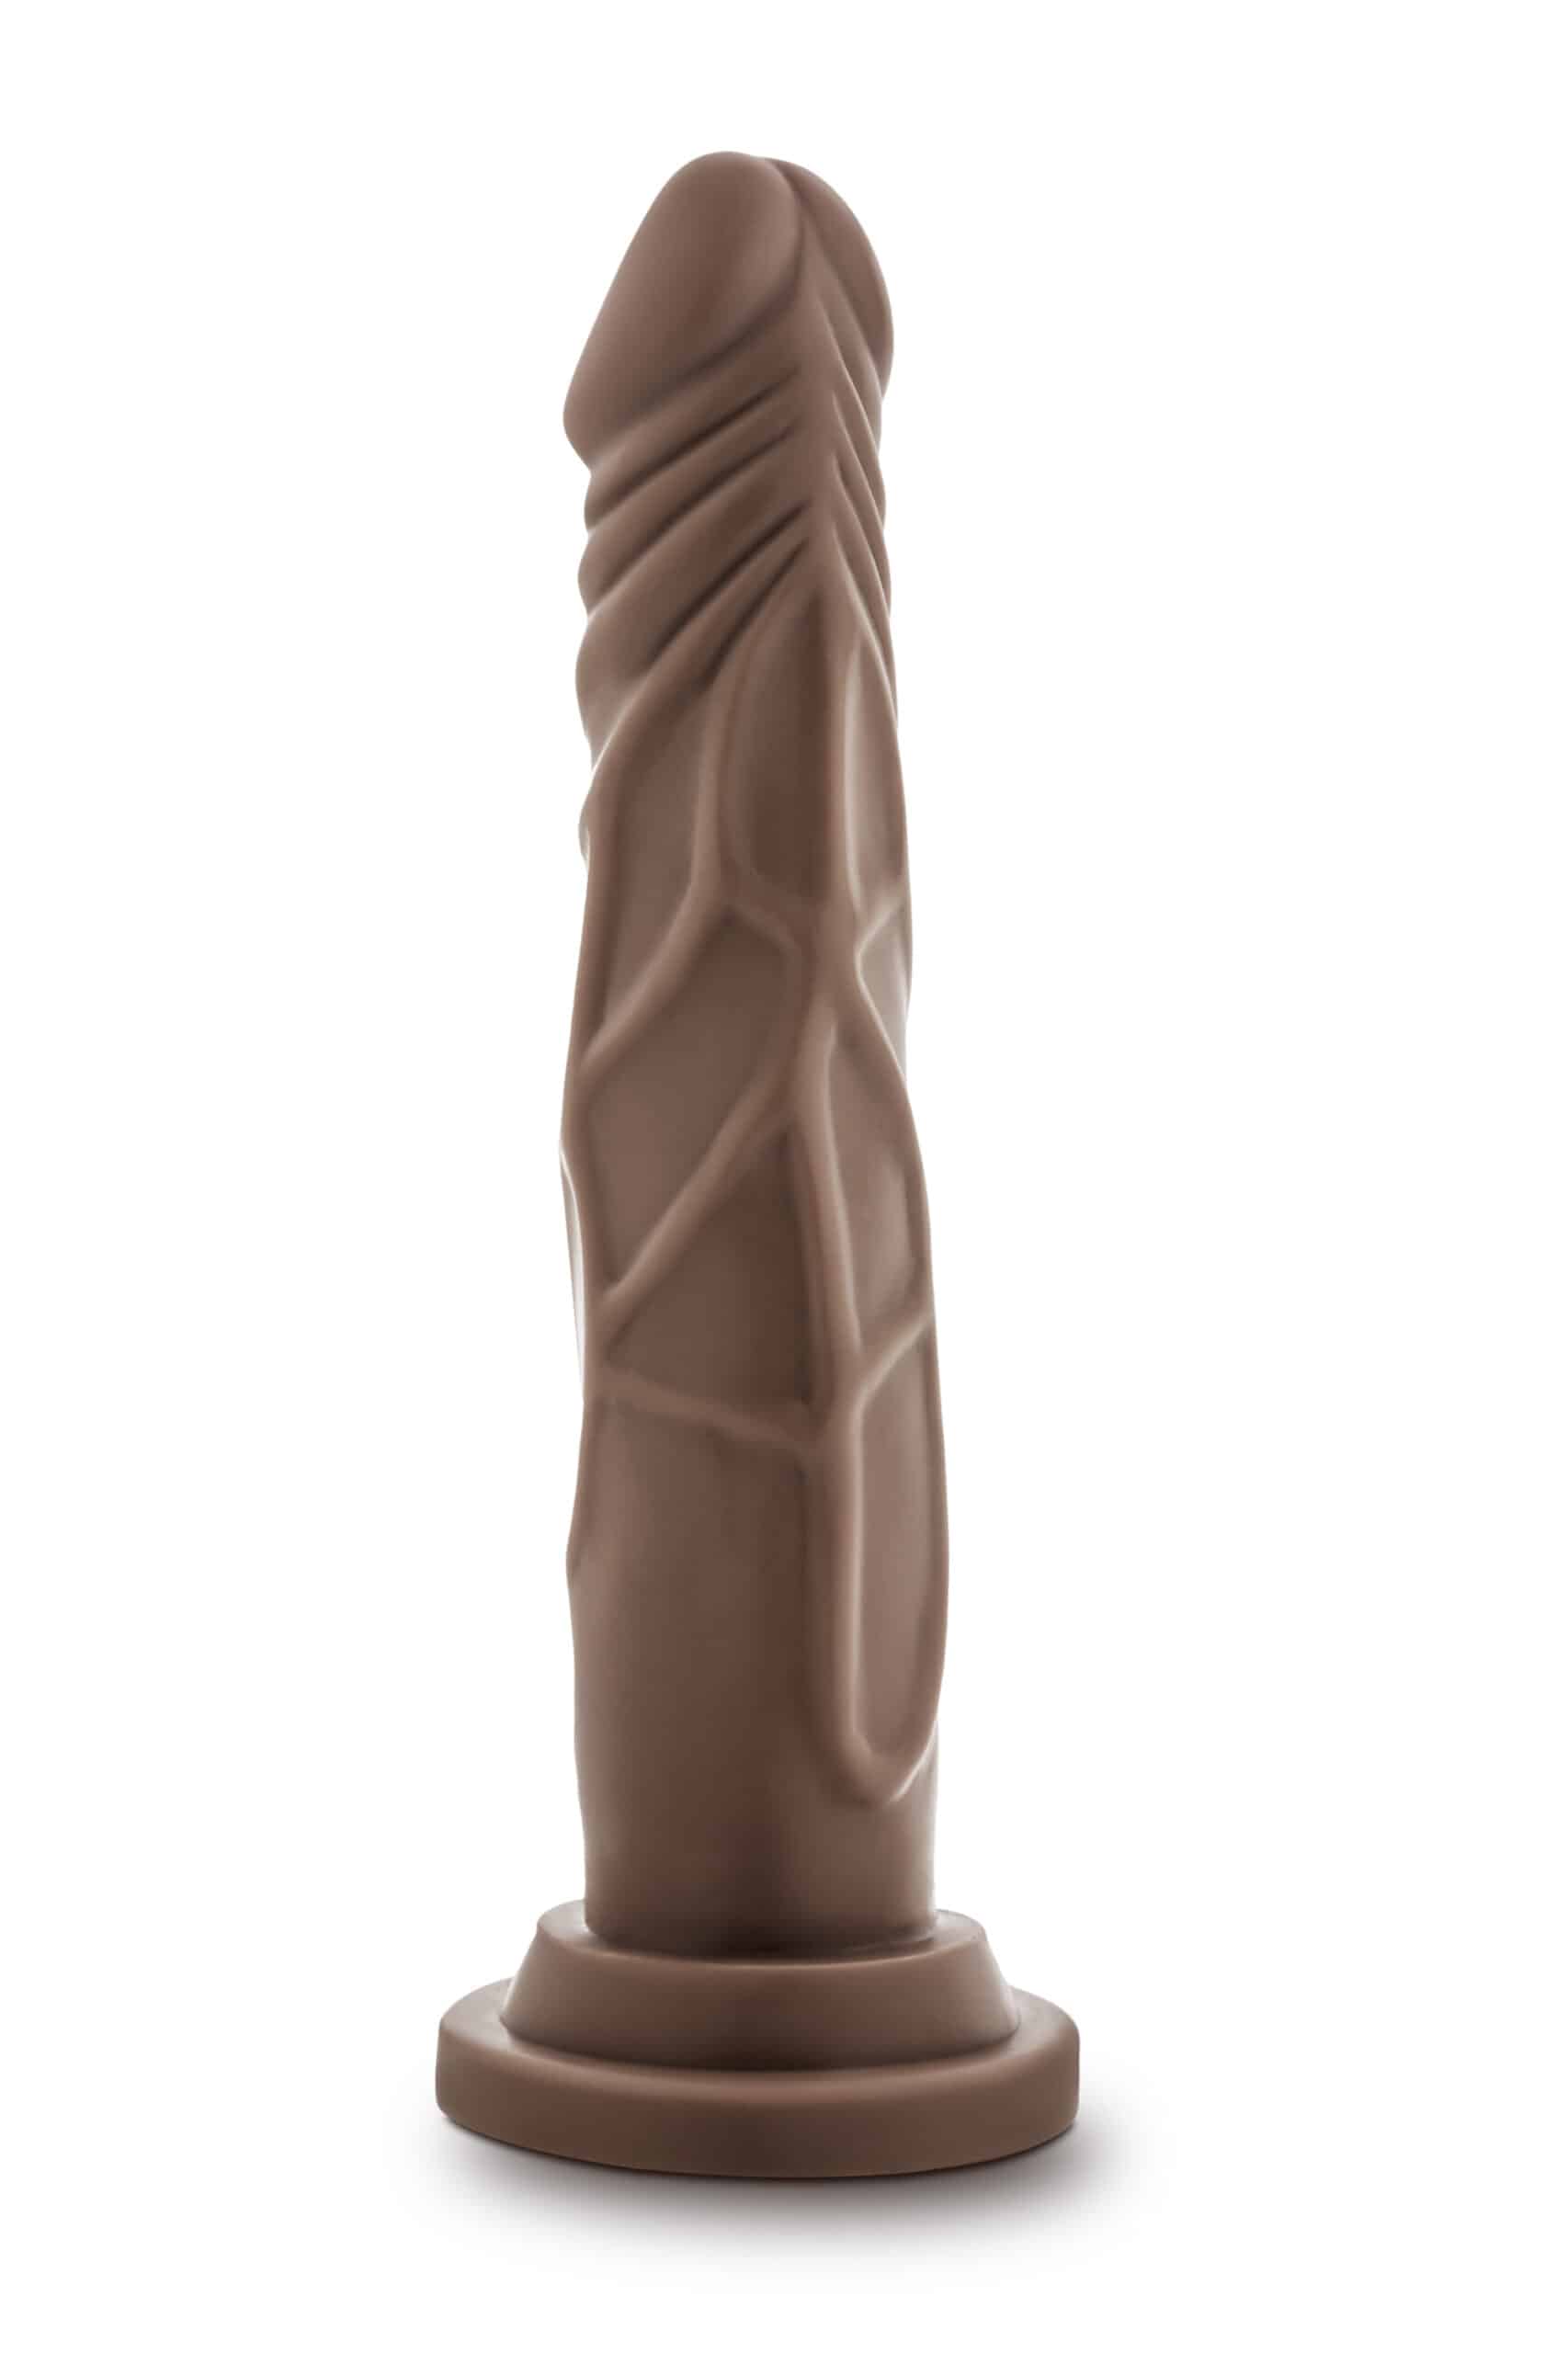 19233-dr-skin-dr-carter-dong-chocolate-19-3.8-cm-love-shop-cy